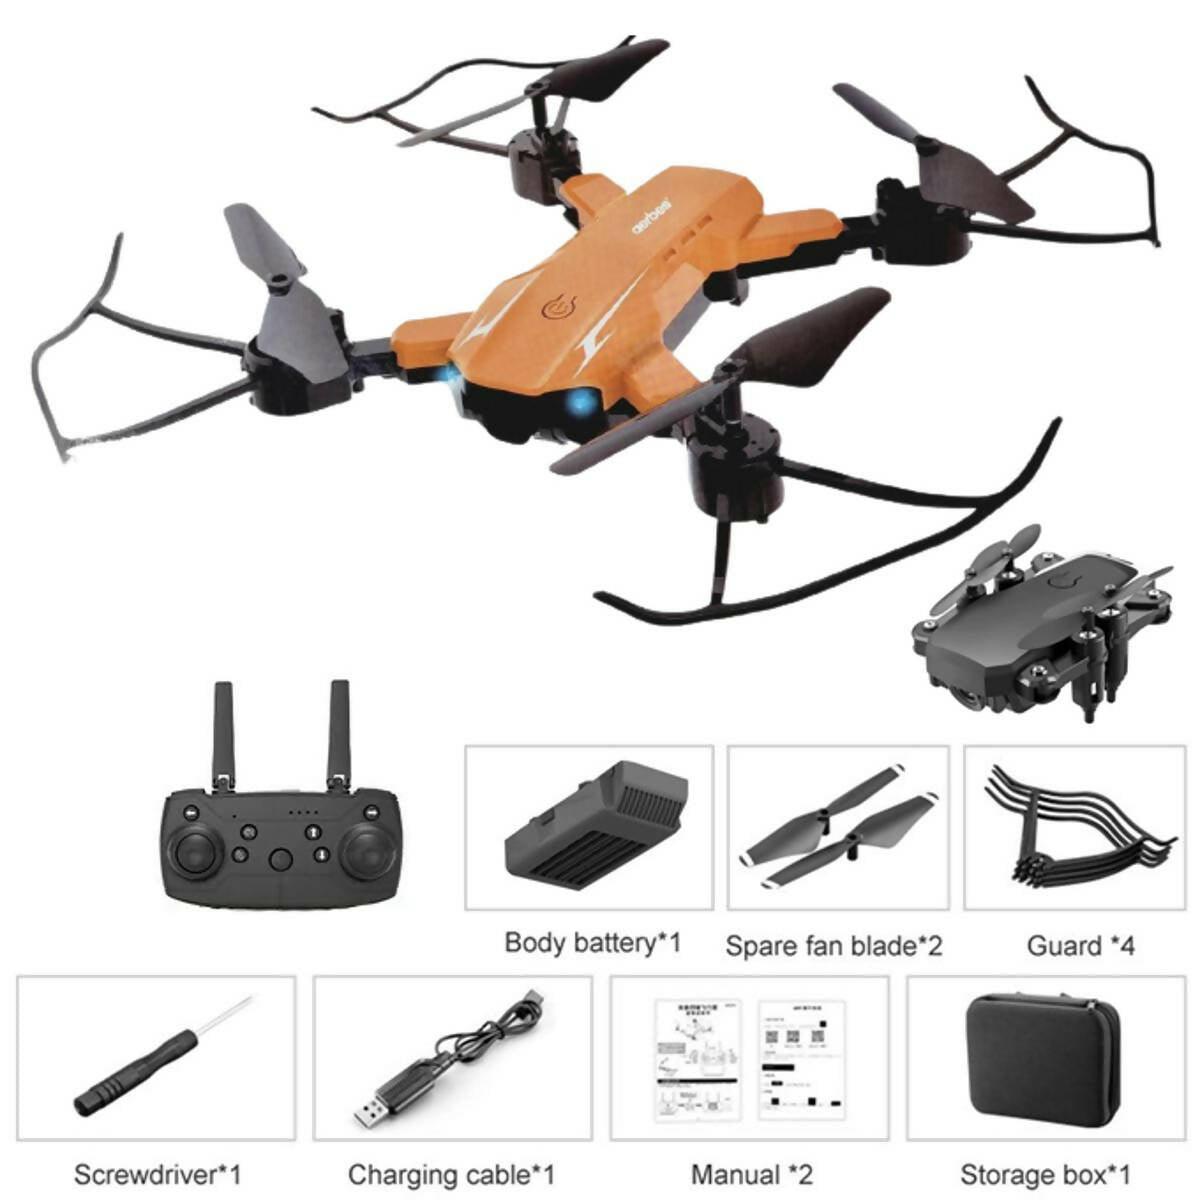 Remote Control 4-axis Structure Drone LED lighting - GPS Headless mode - Without Camera - Orange - ValueBox